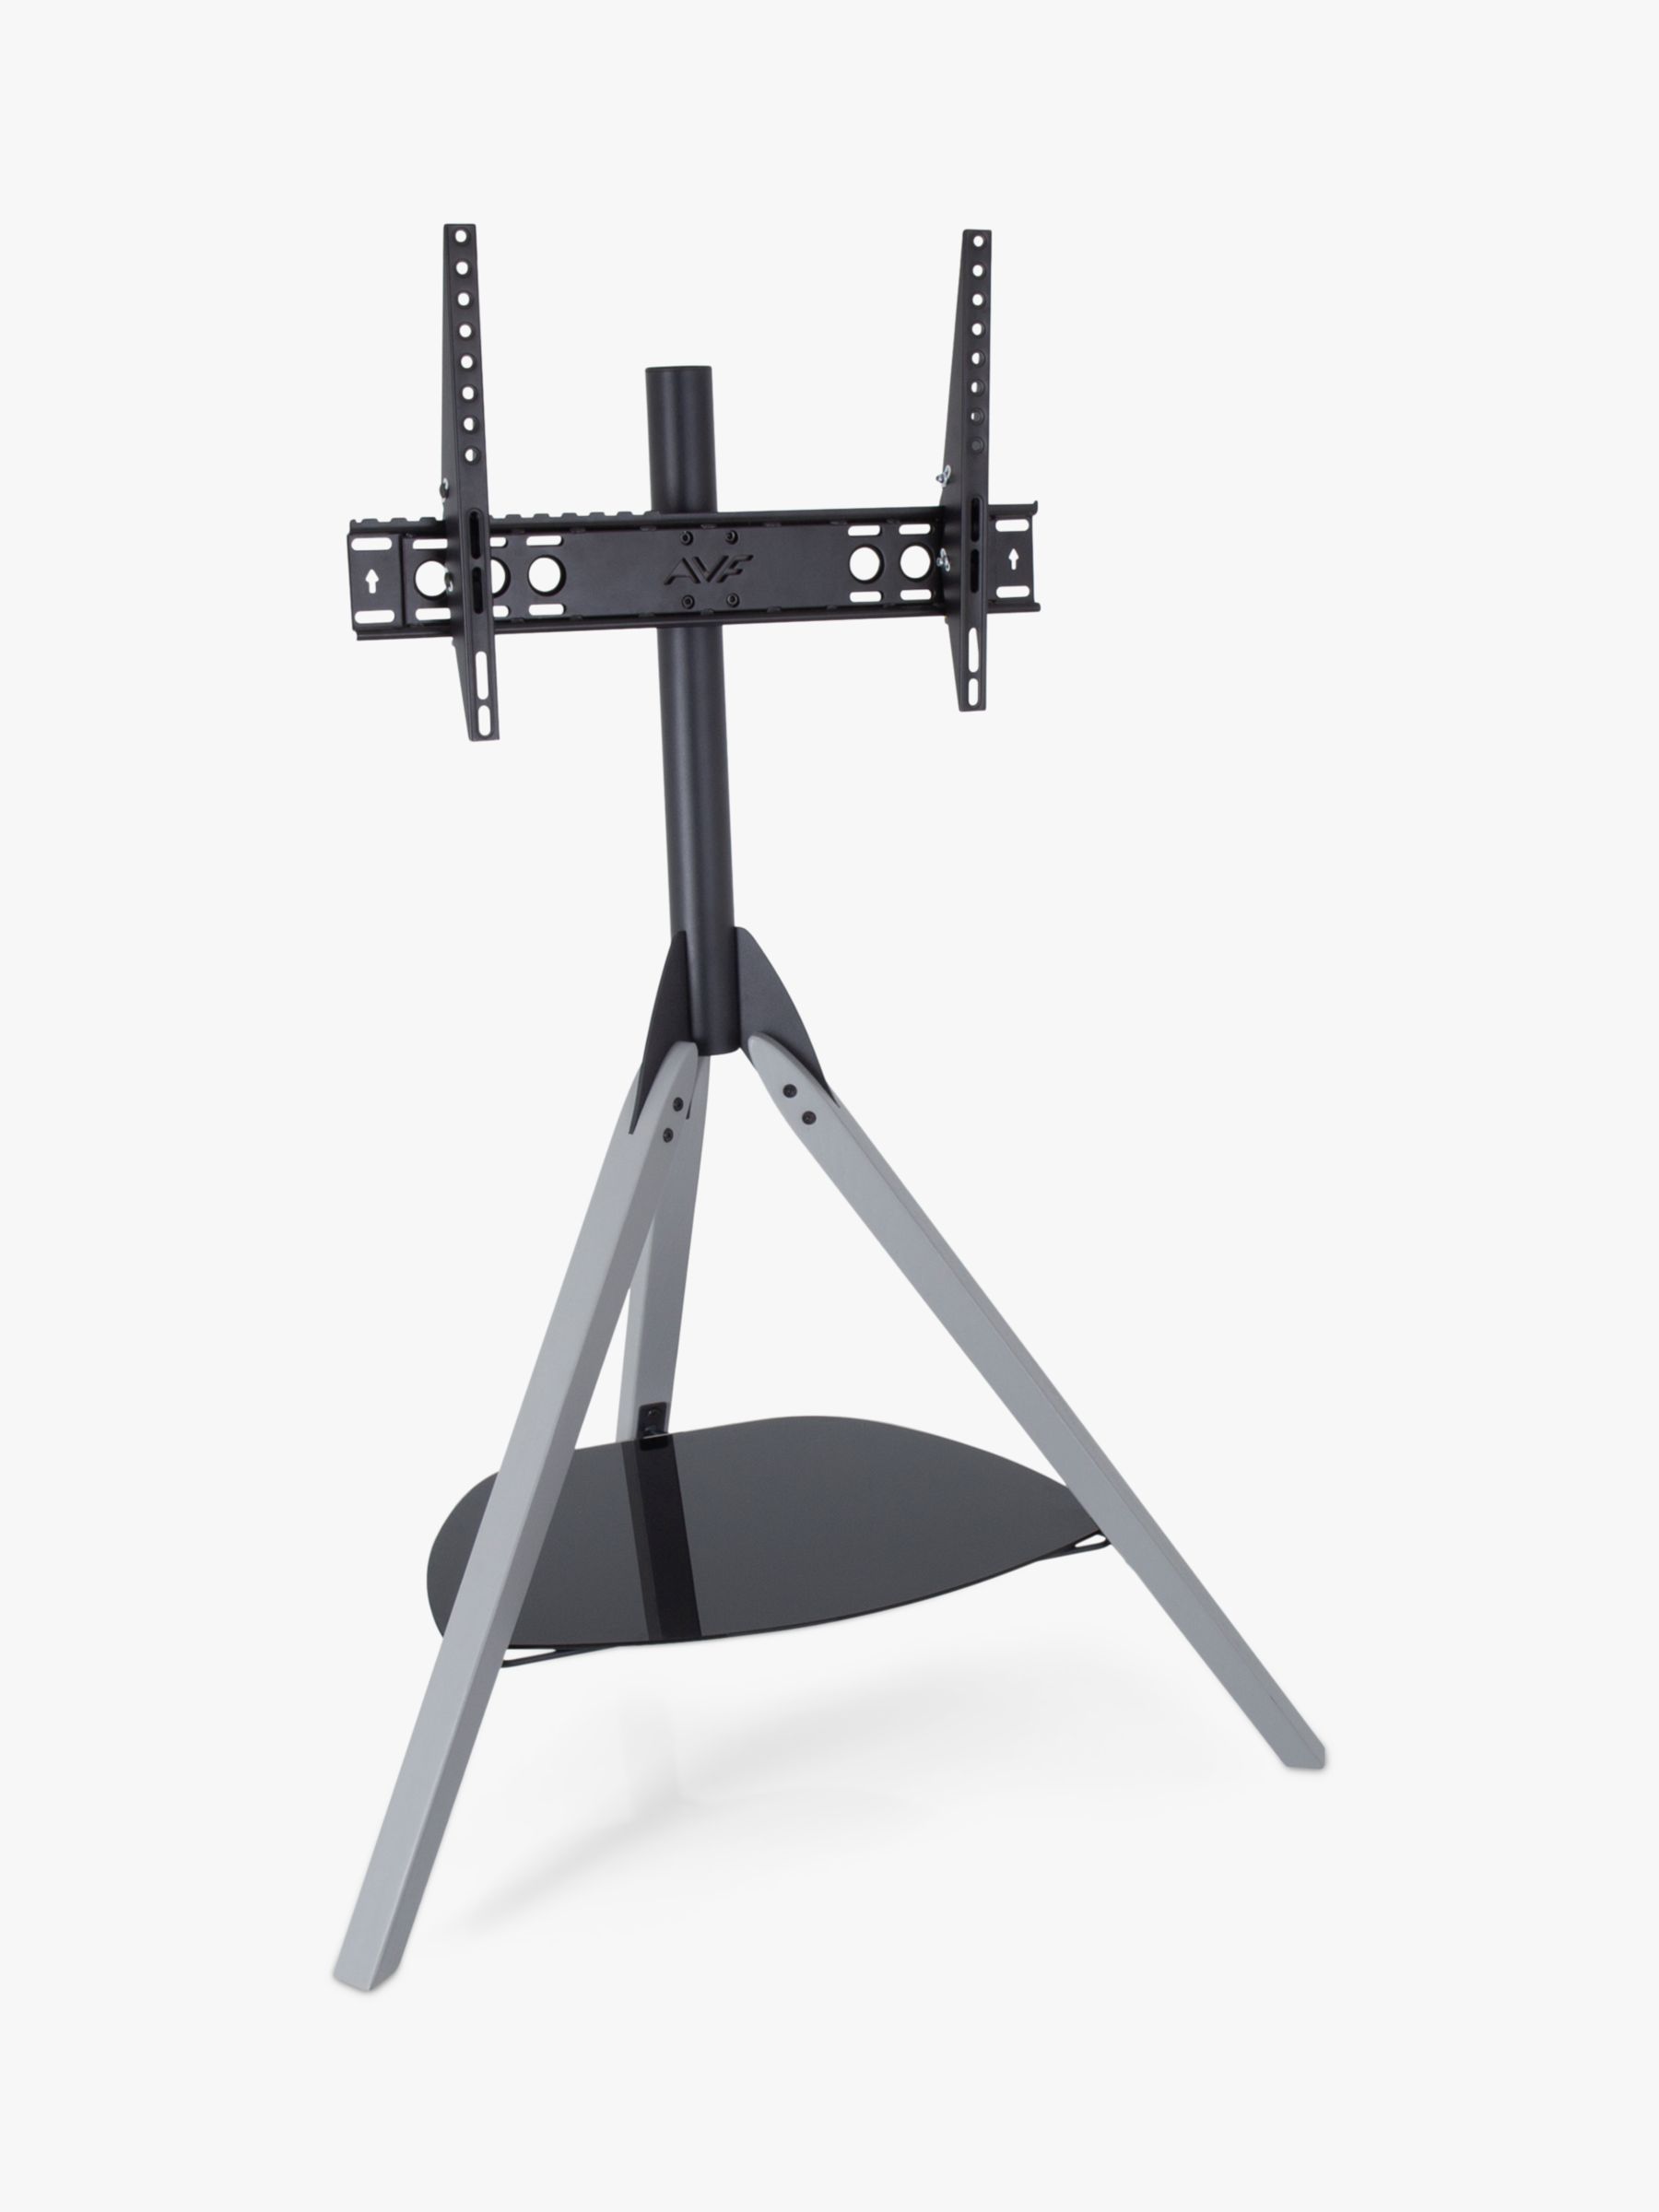 Photo of Avf hoxton tripod tv stand with mount for tvs from 32 to 70